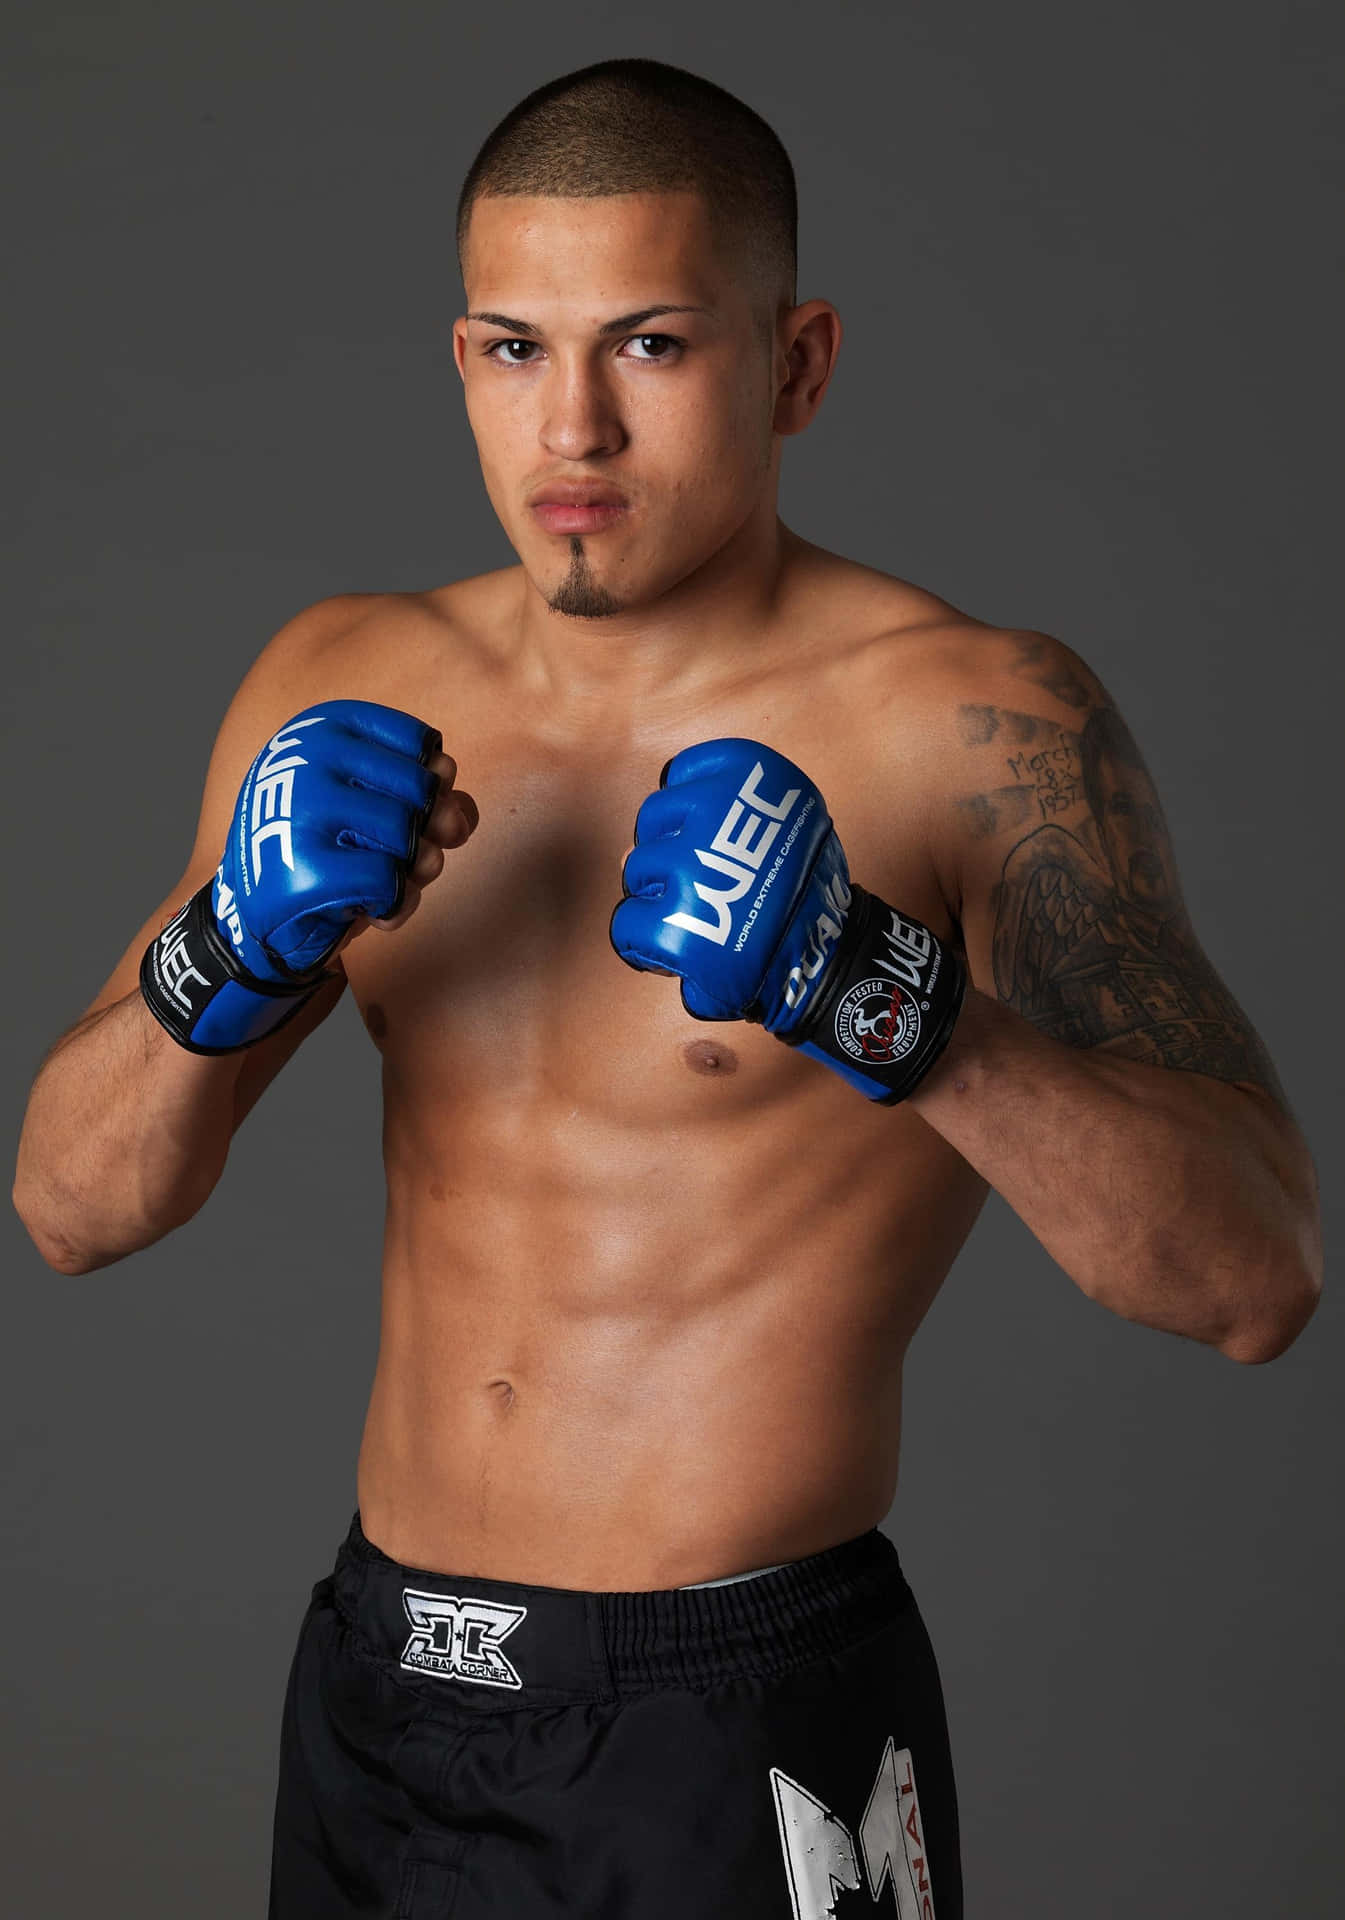 Hot Latino Ufc Fighter Anthony Pettis Wallpaper